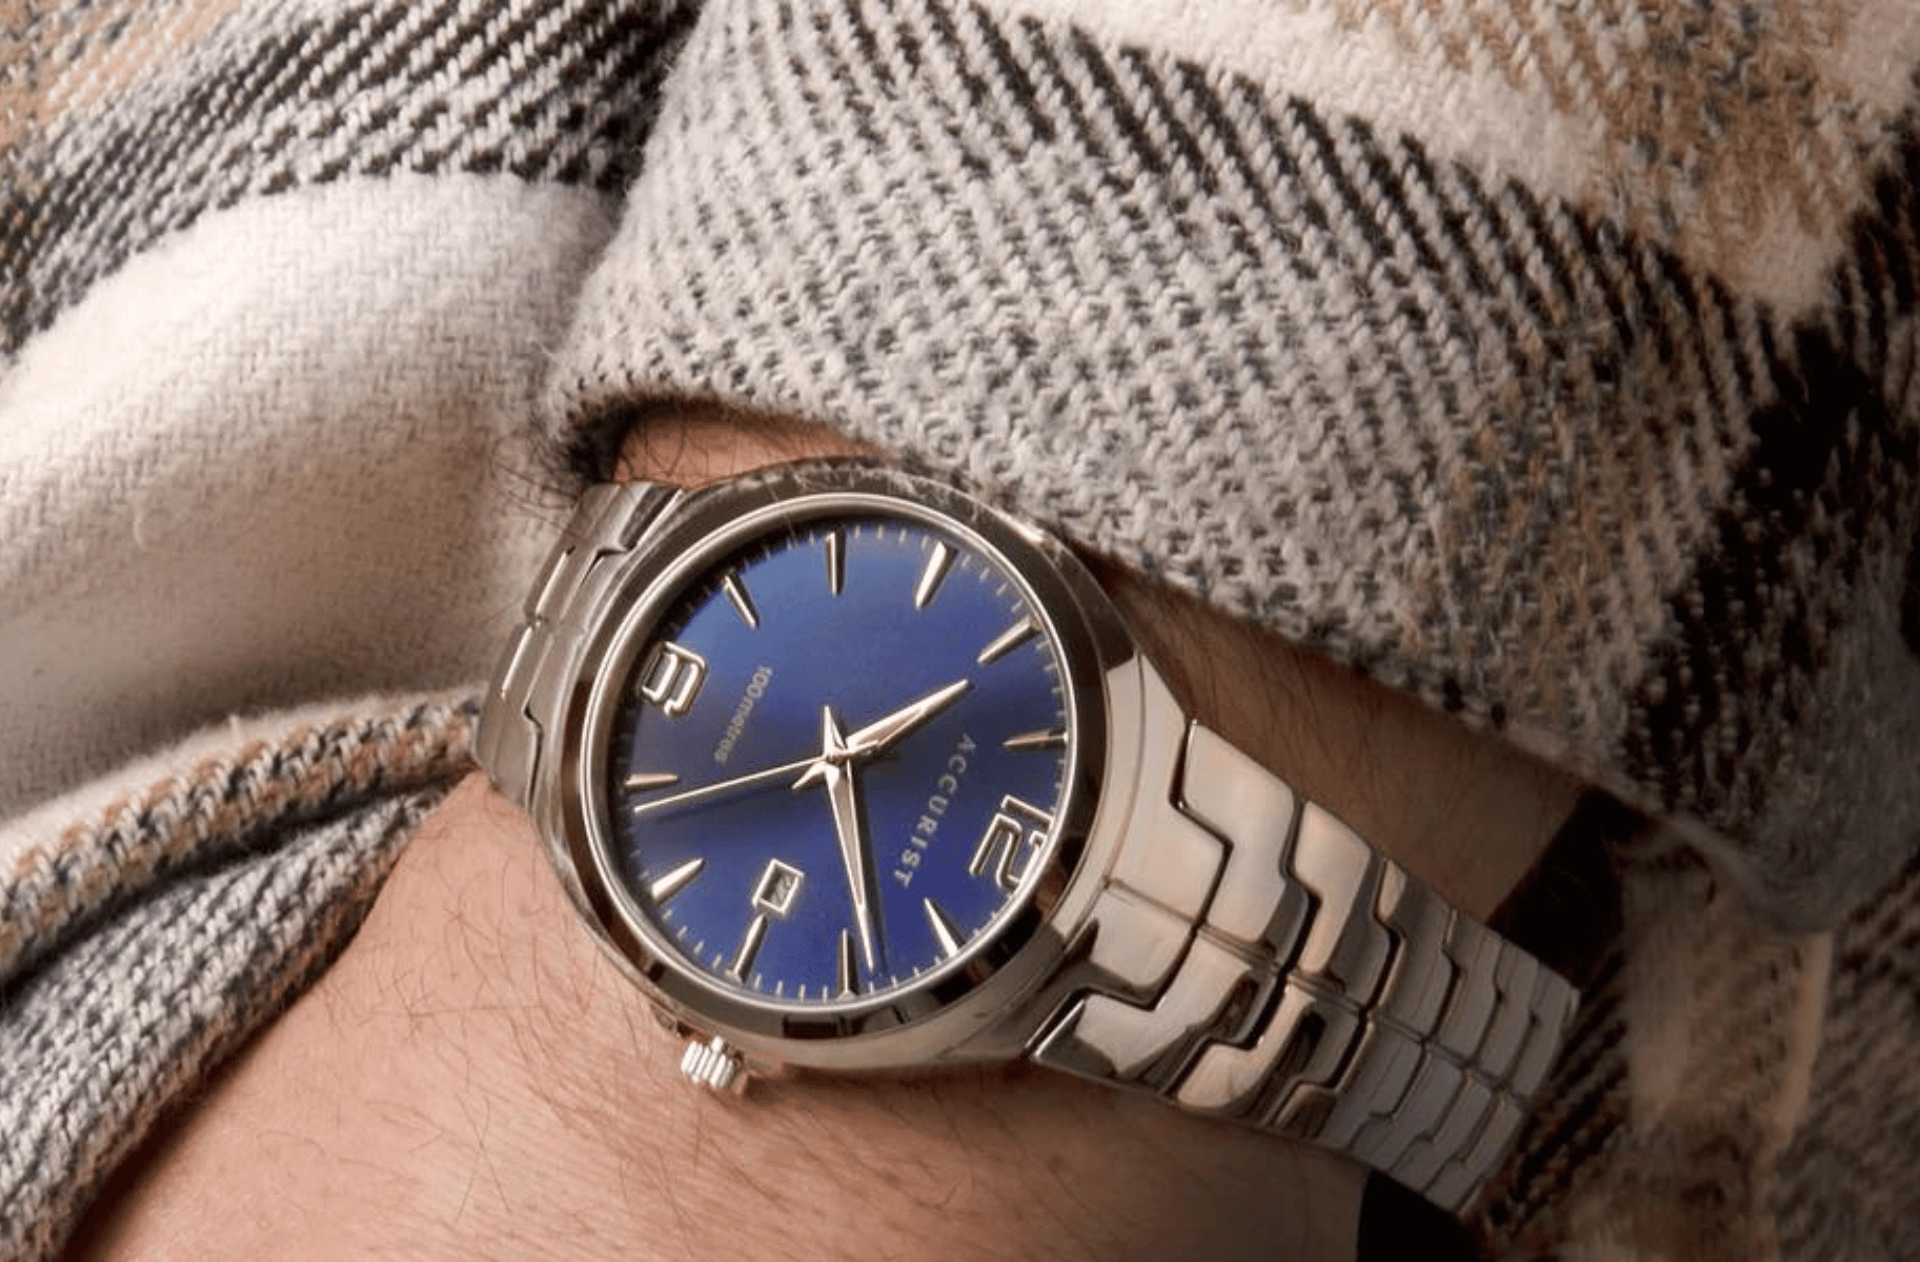 A Full Accurist Watches Review - Classy and Durable Watch